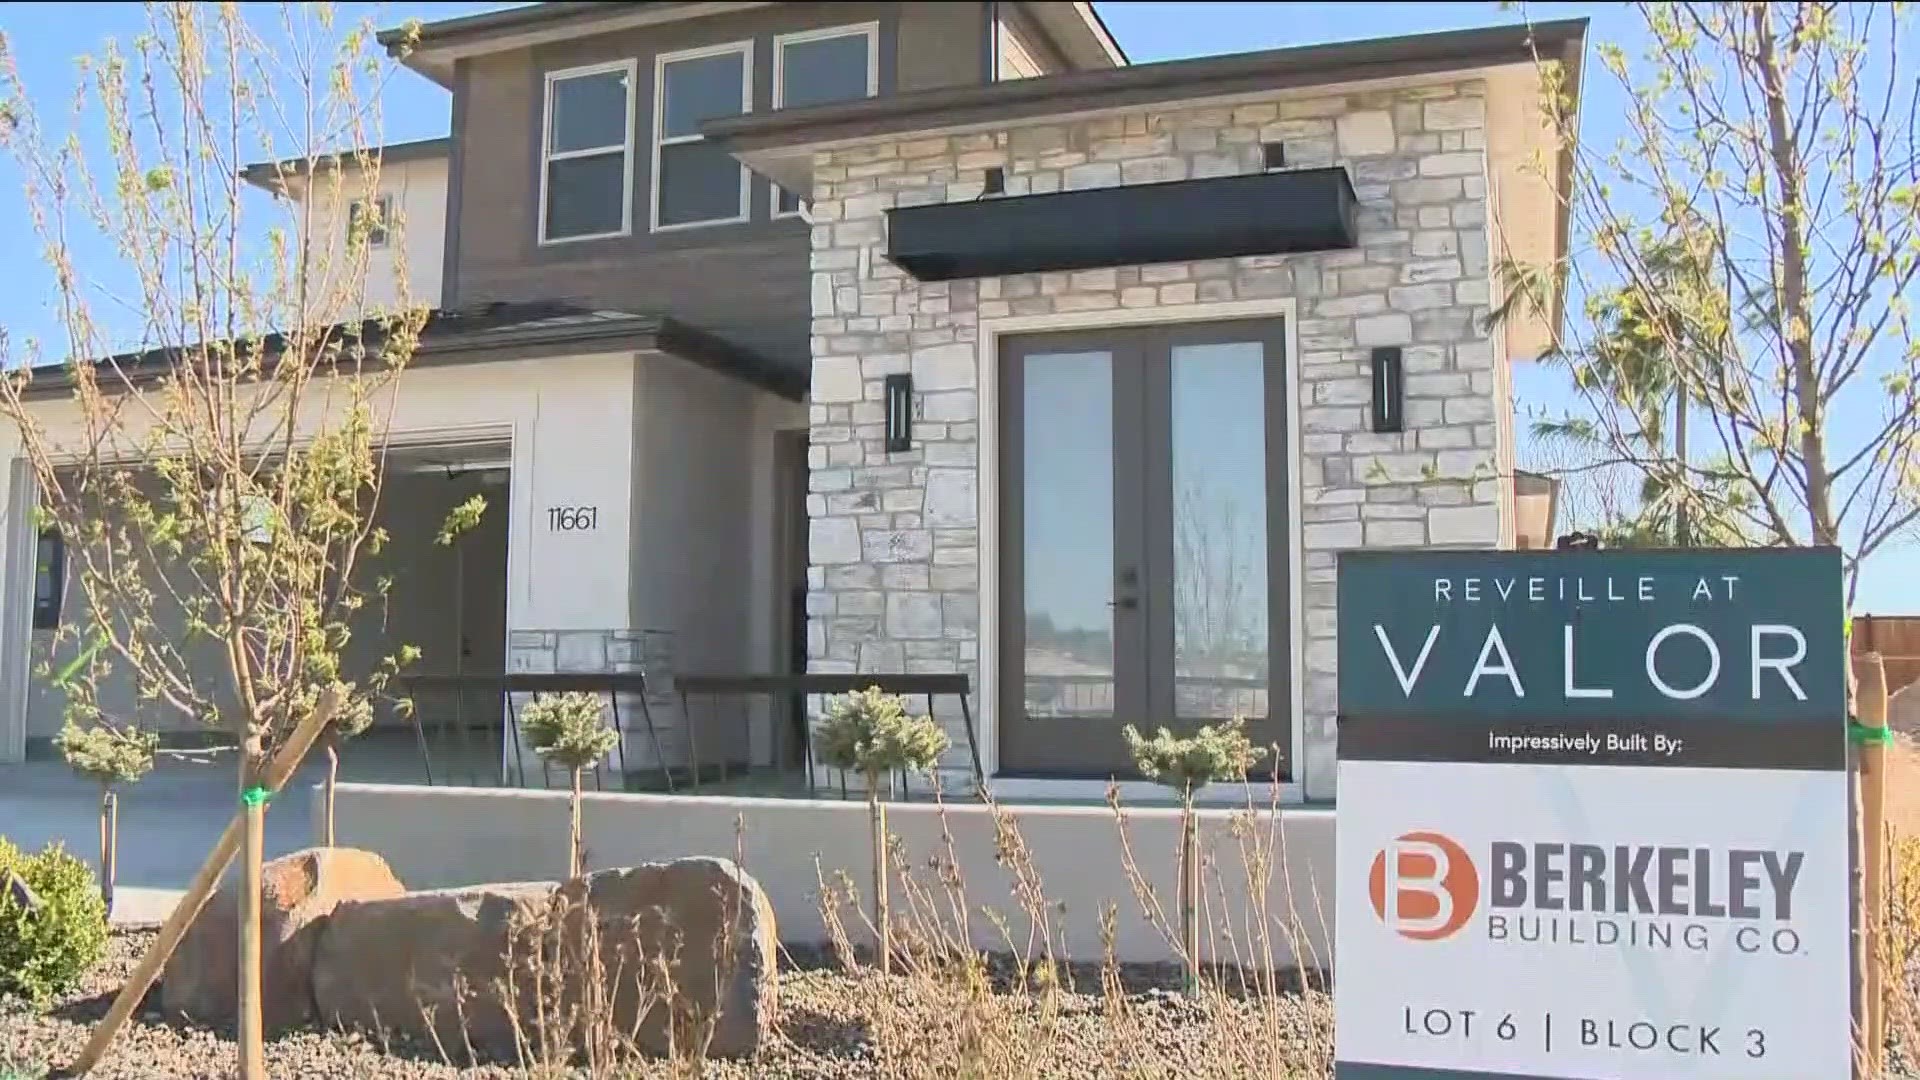 Idaho's 2023 St. Jude Dream Home is a 3-bedroom, 3-bathroom in the Valor community in Kuna. Tickets went on sale at 5 a.m. April 26.